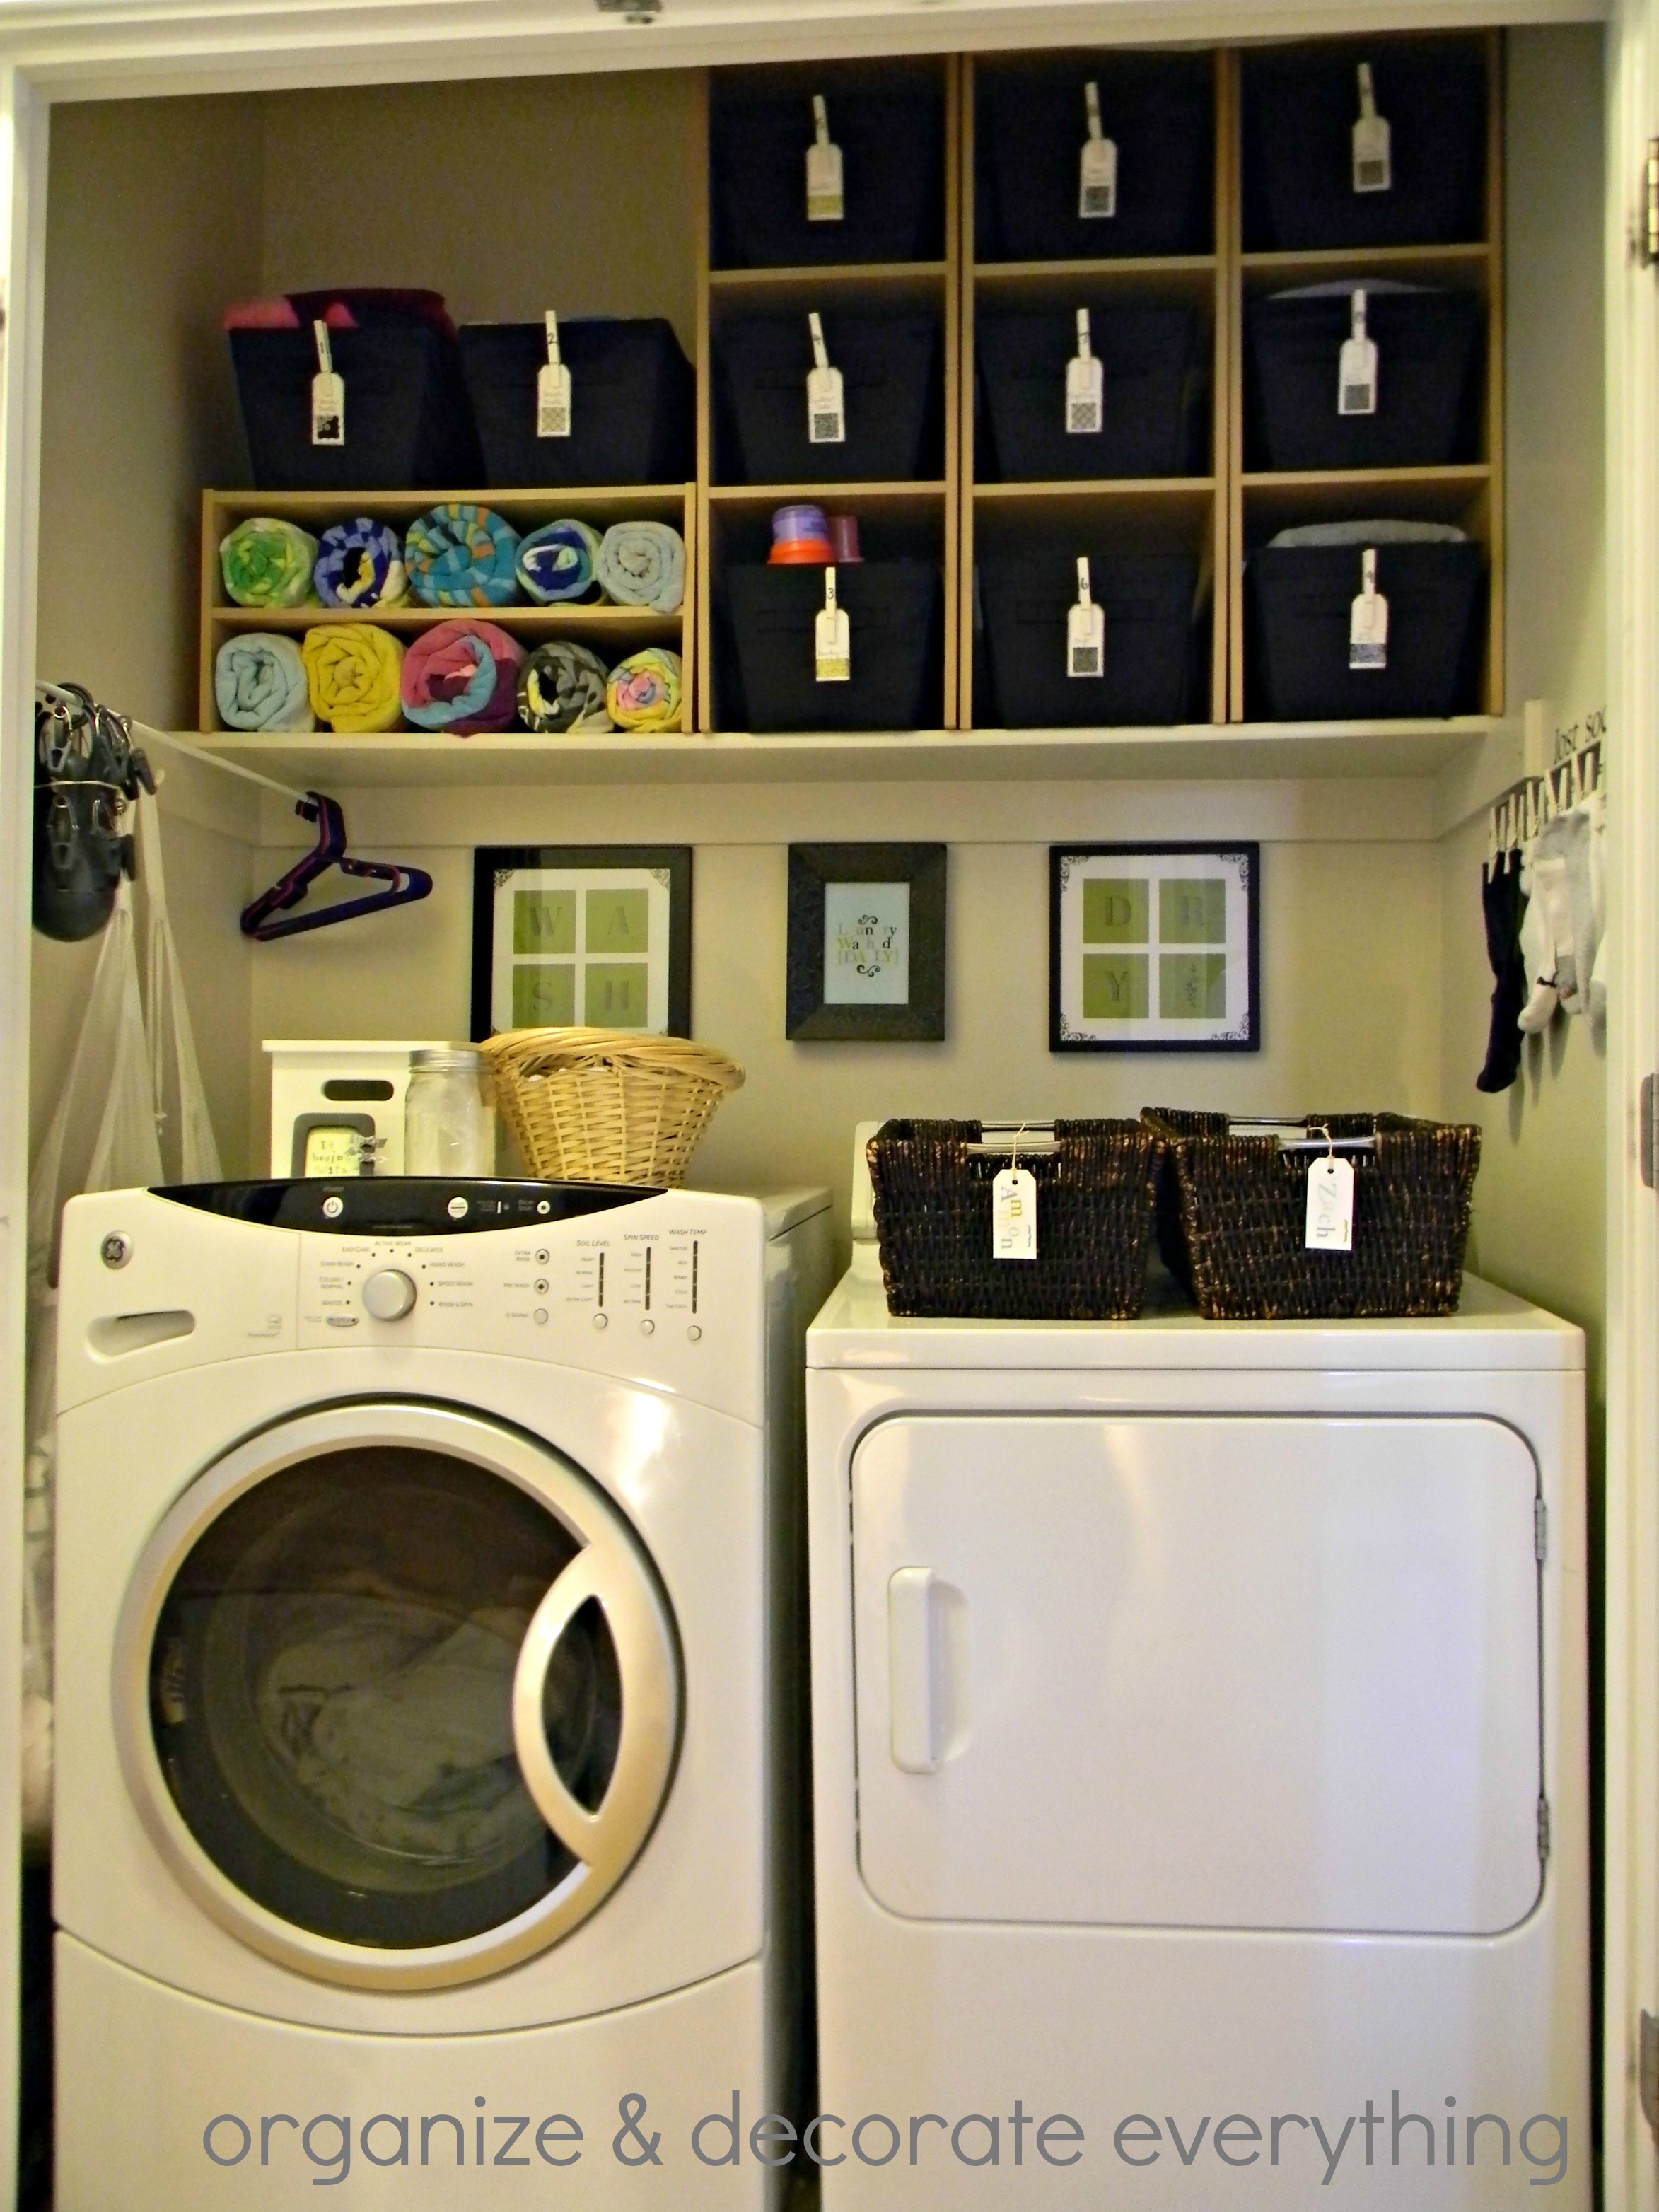 Organized space of the week - Laundry closet | A Bowl Full of Lemons